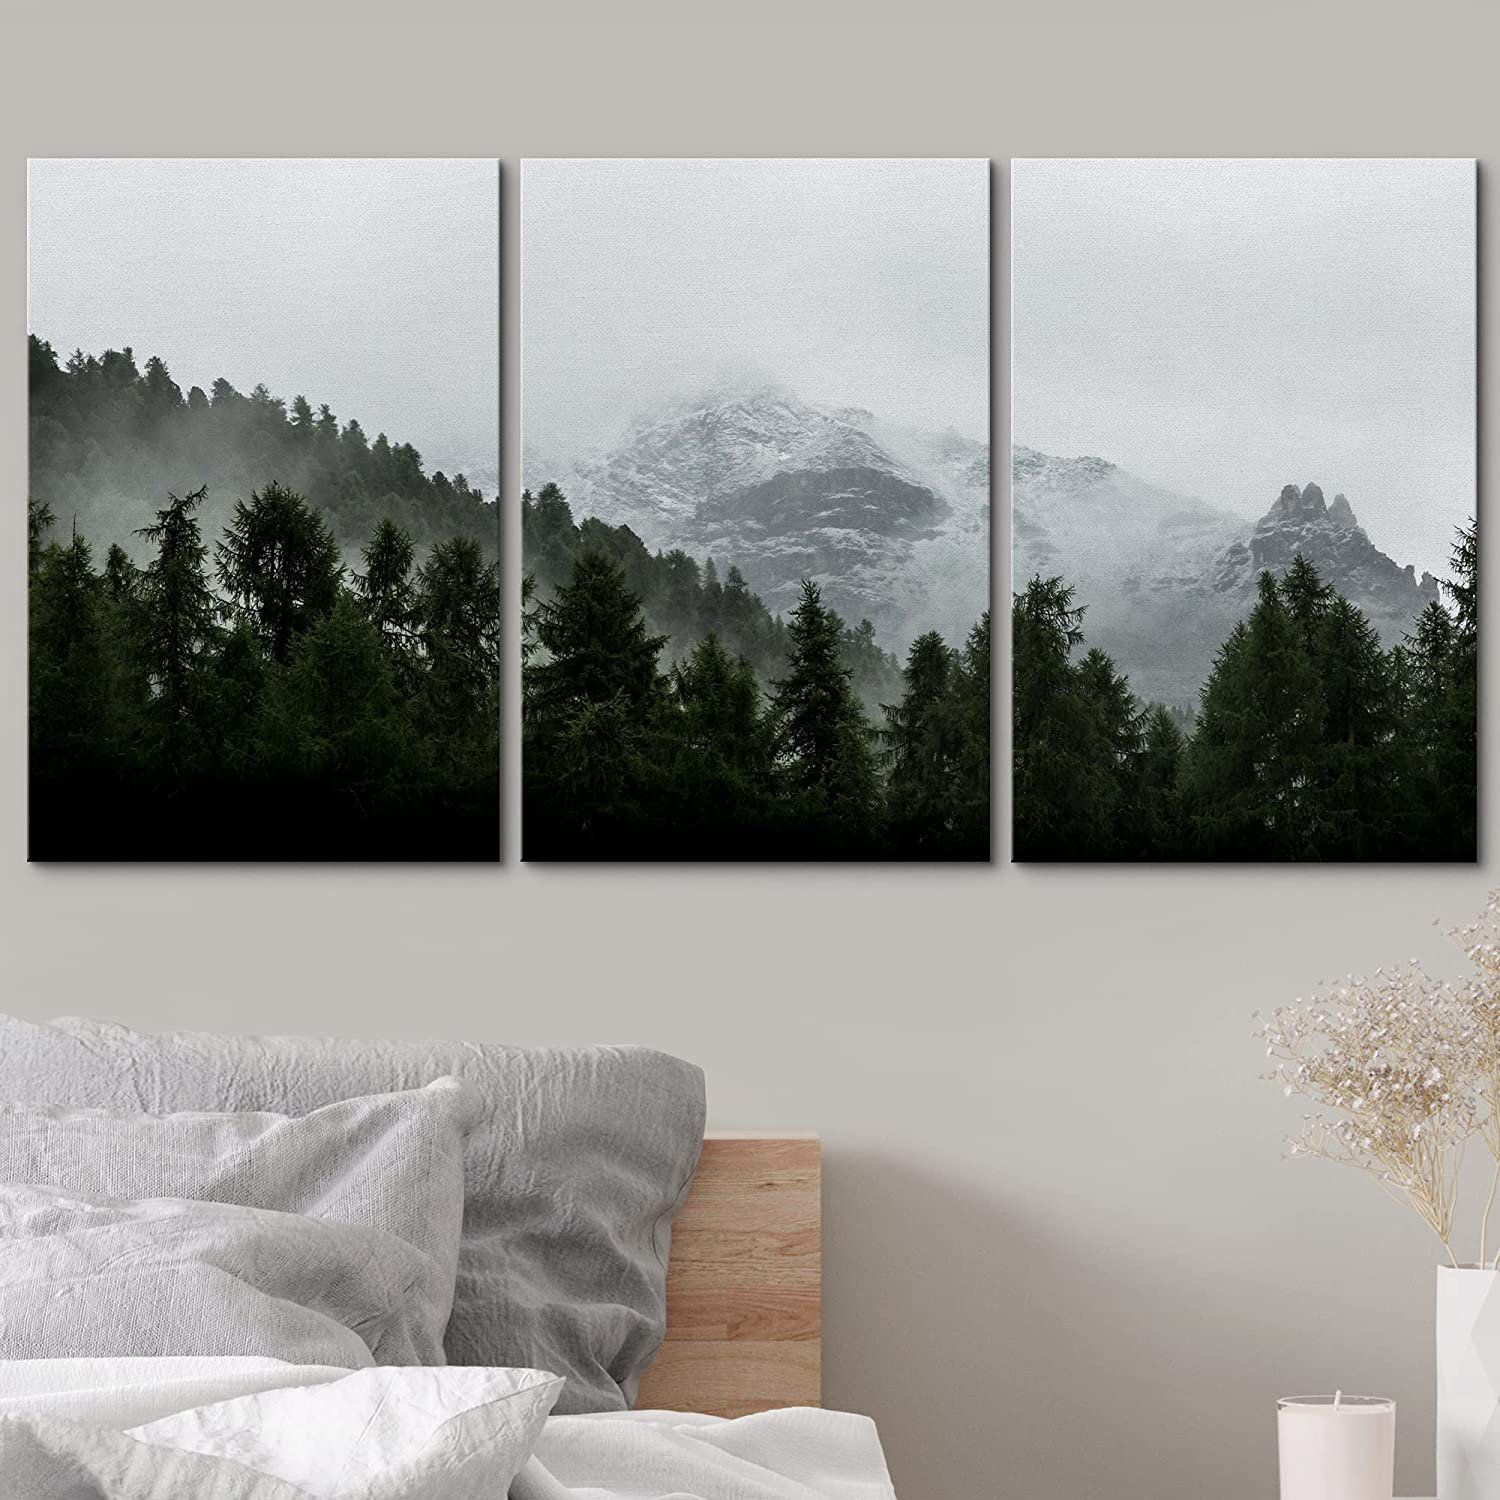 Idea4Wall Landscape Of Mountain With Fog – 3 Piece Print On Canvas &  Reviews | Wayfair Within Mountains In The Fog Wall Art (View 1 of 15)